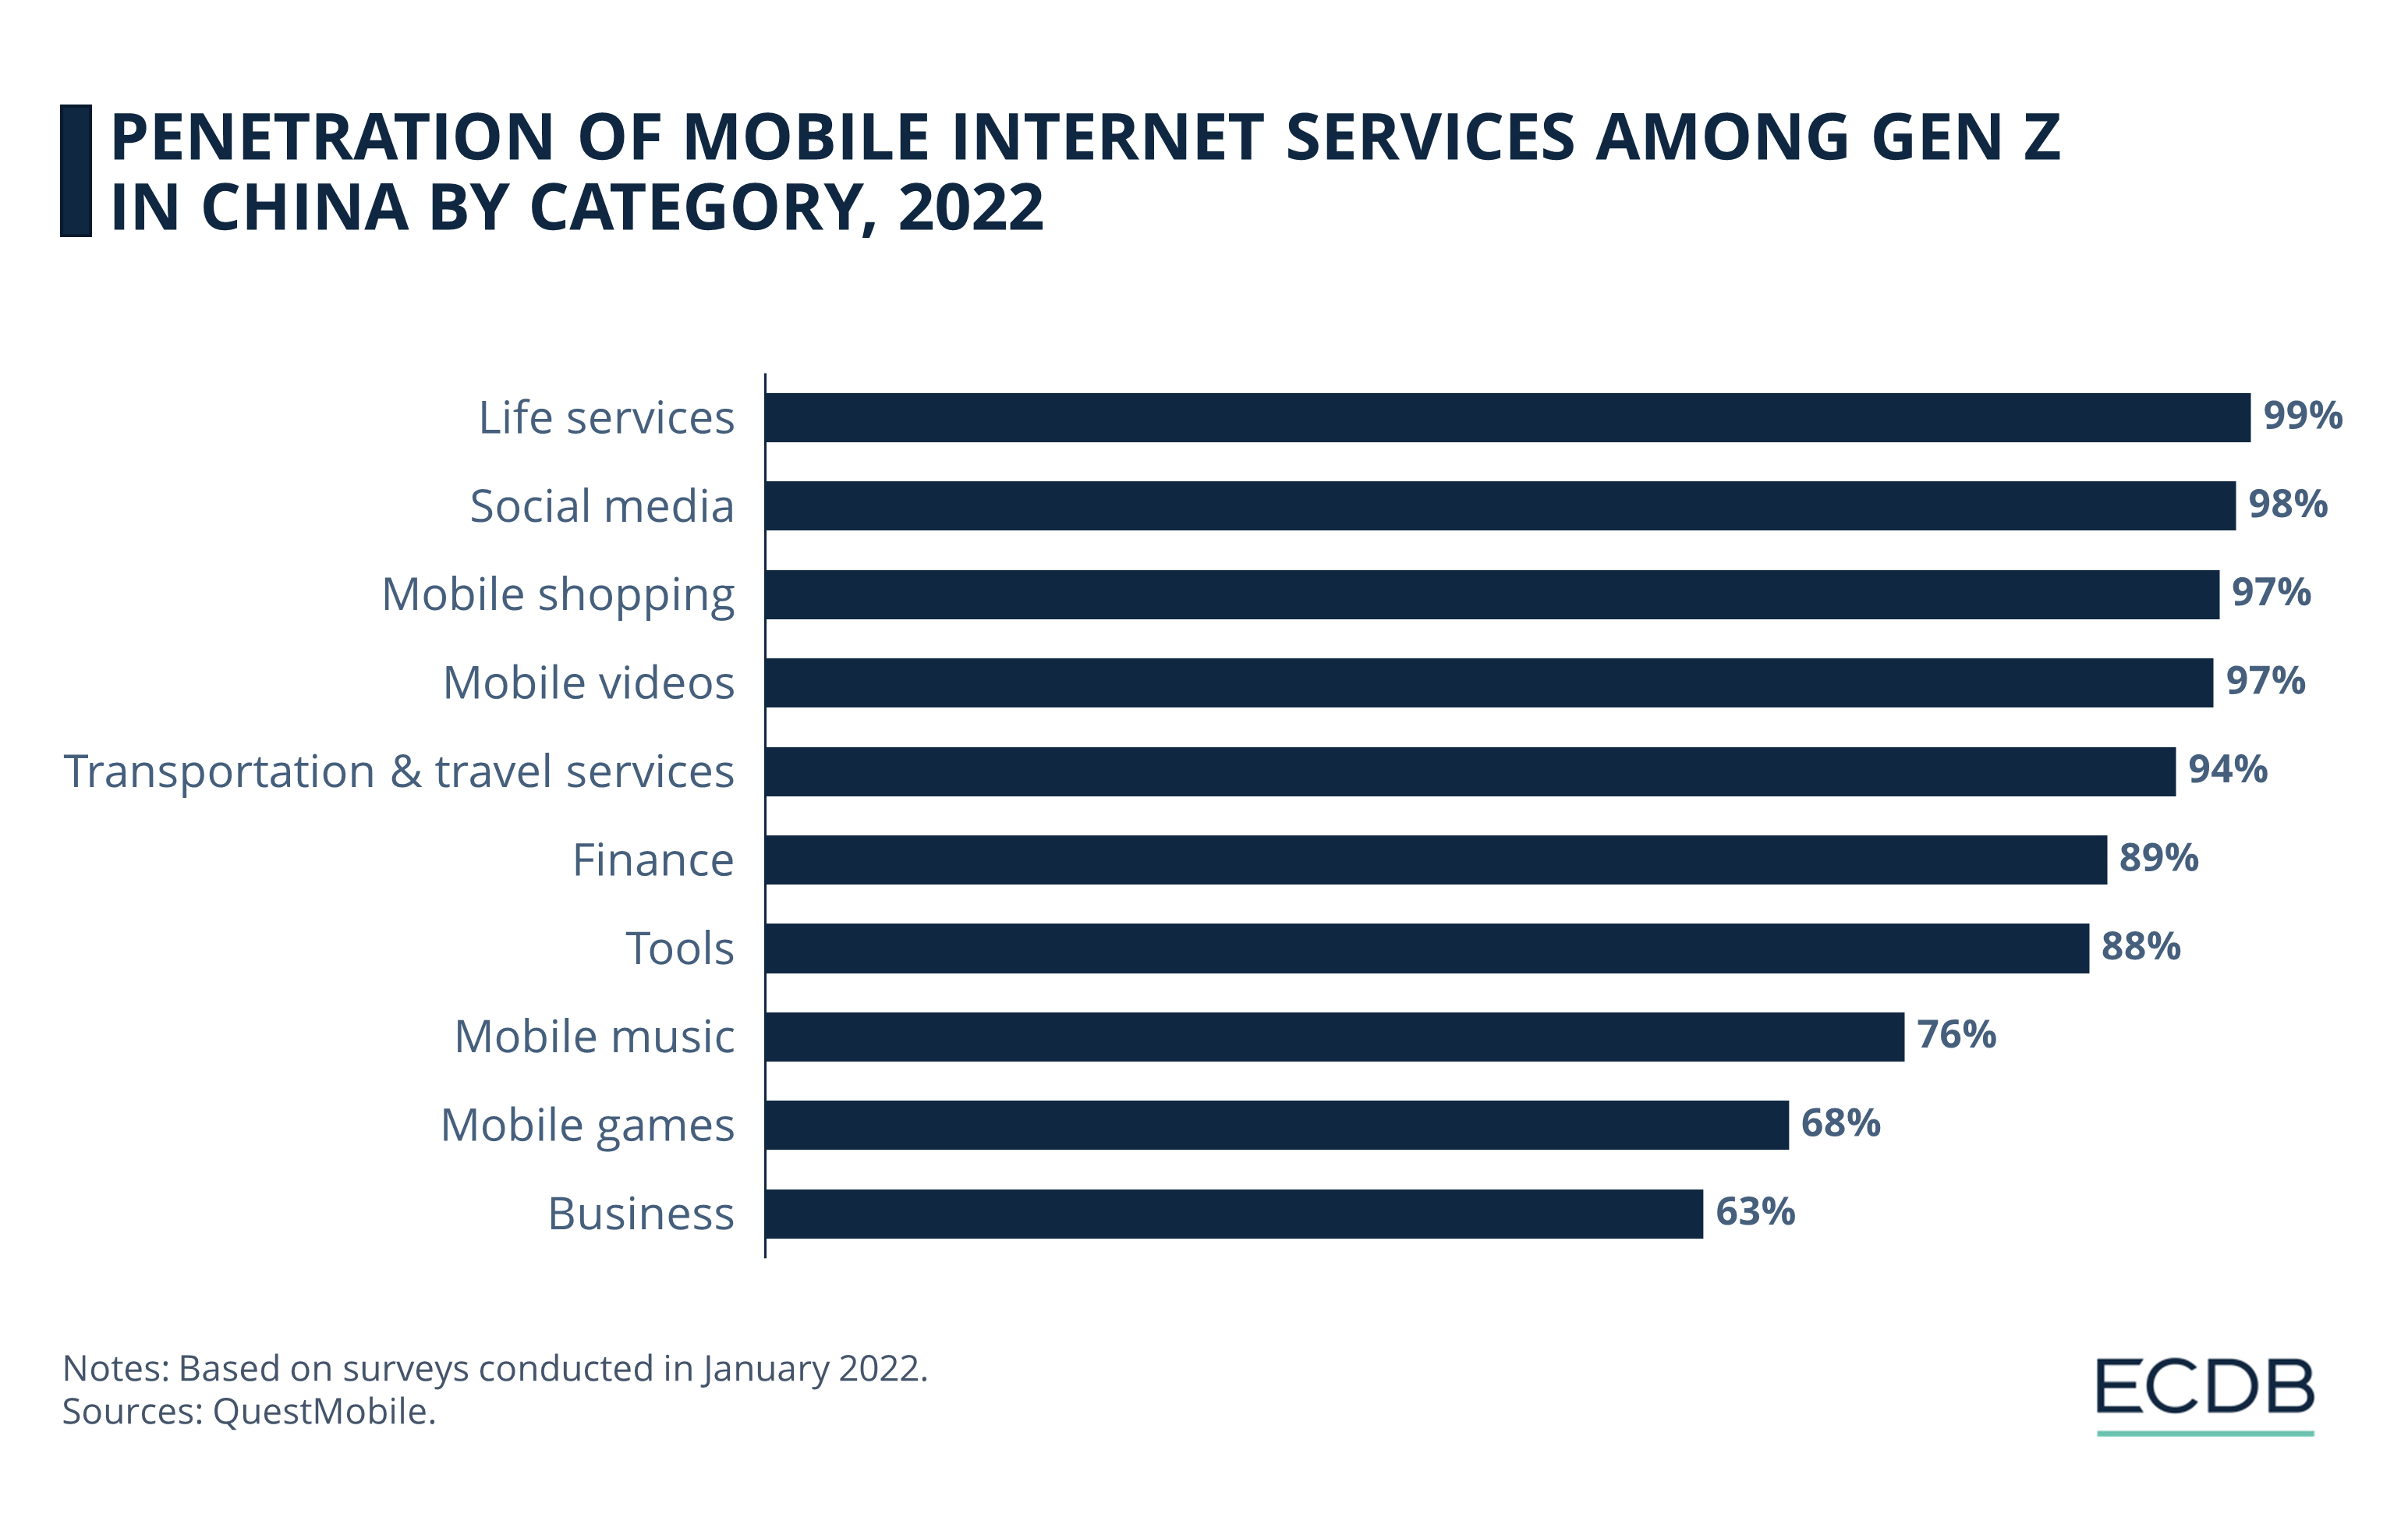 Penetration of Mobile Internet Services Among Gen Z in China by Category, 2022